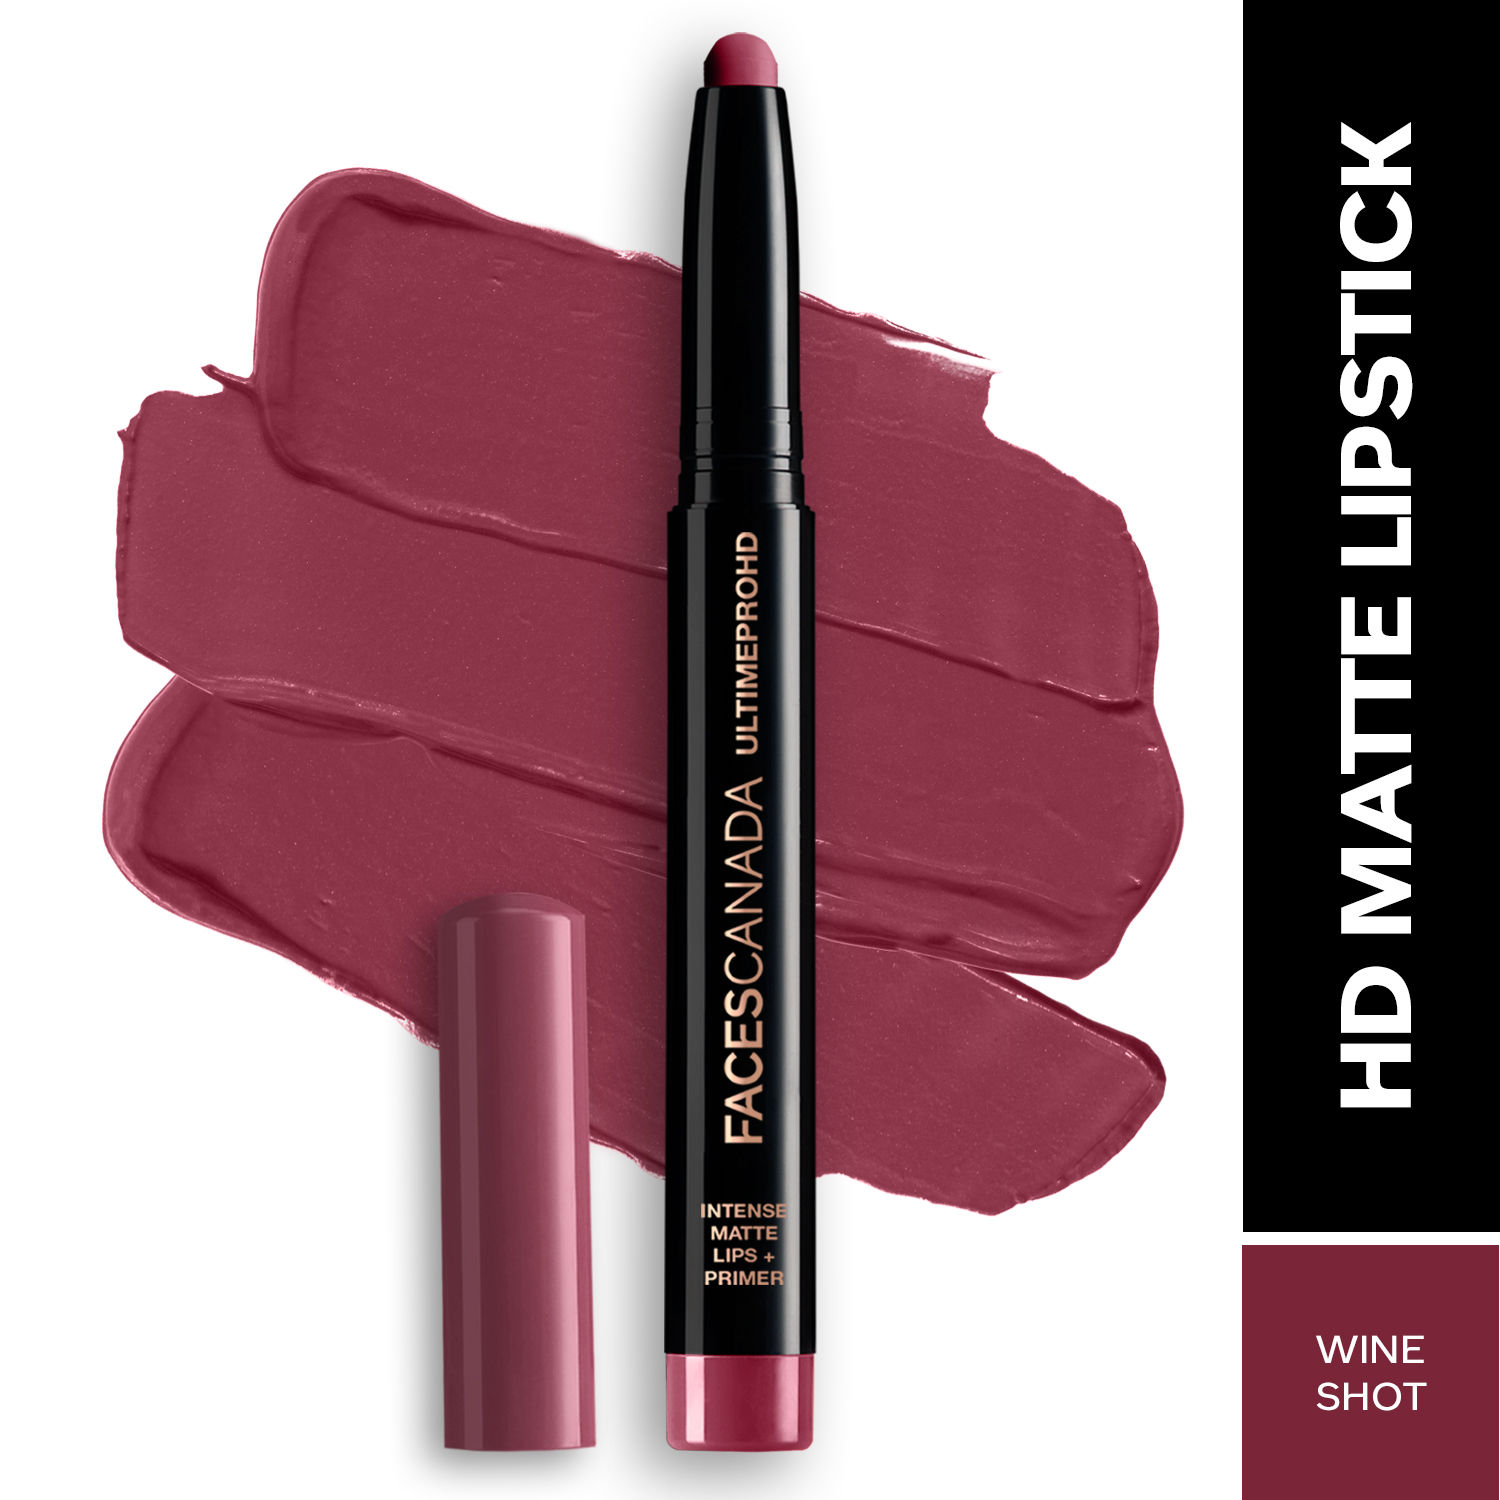 Buy FACES CANADA Ultime Pro HD Intense Matte Lipstick + Primer - Wine Shot, 1.4g | 9HR Long Stay | Feather-Light Comfort | Intense Color | Smooth Glide - Purplle